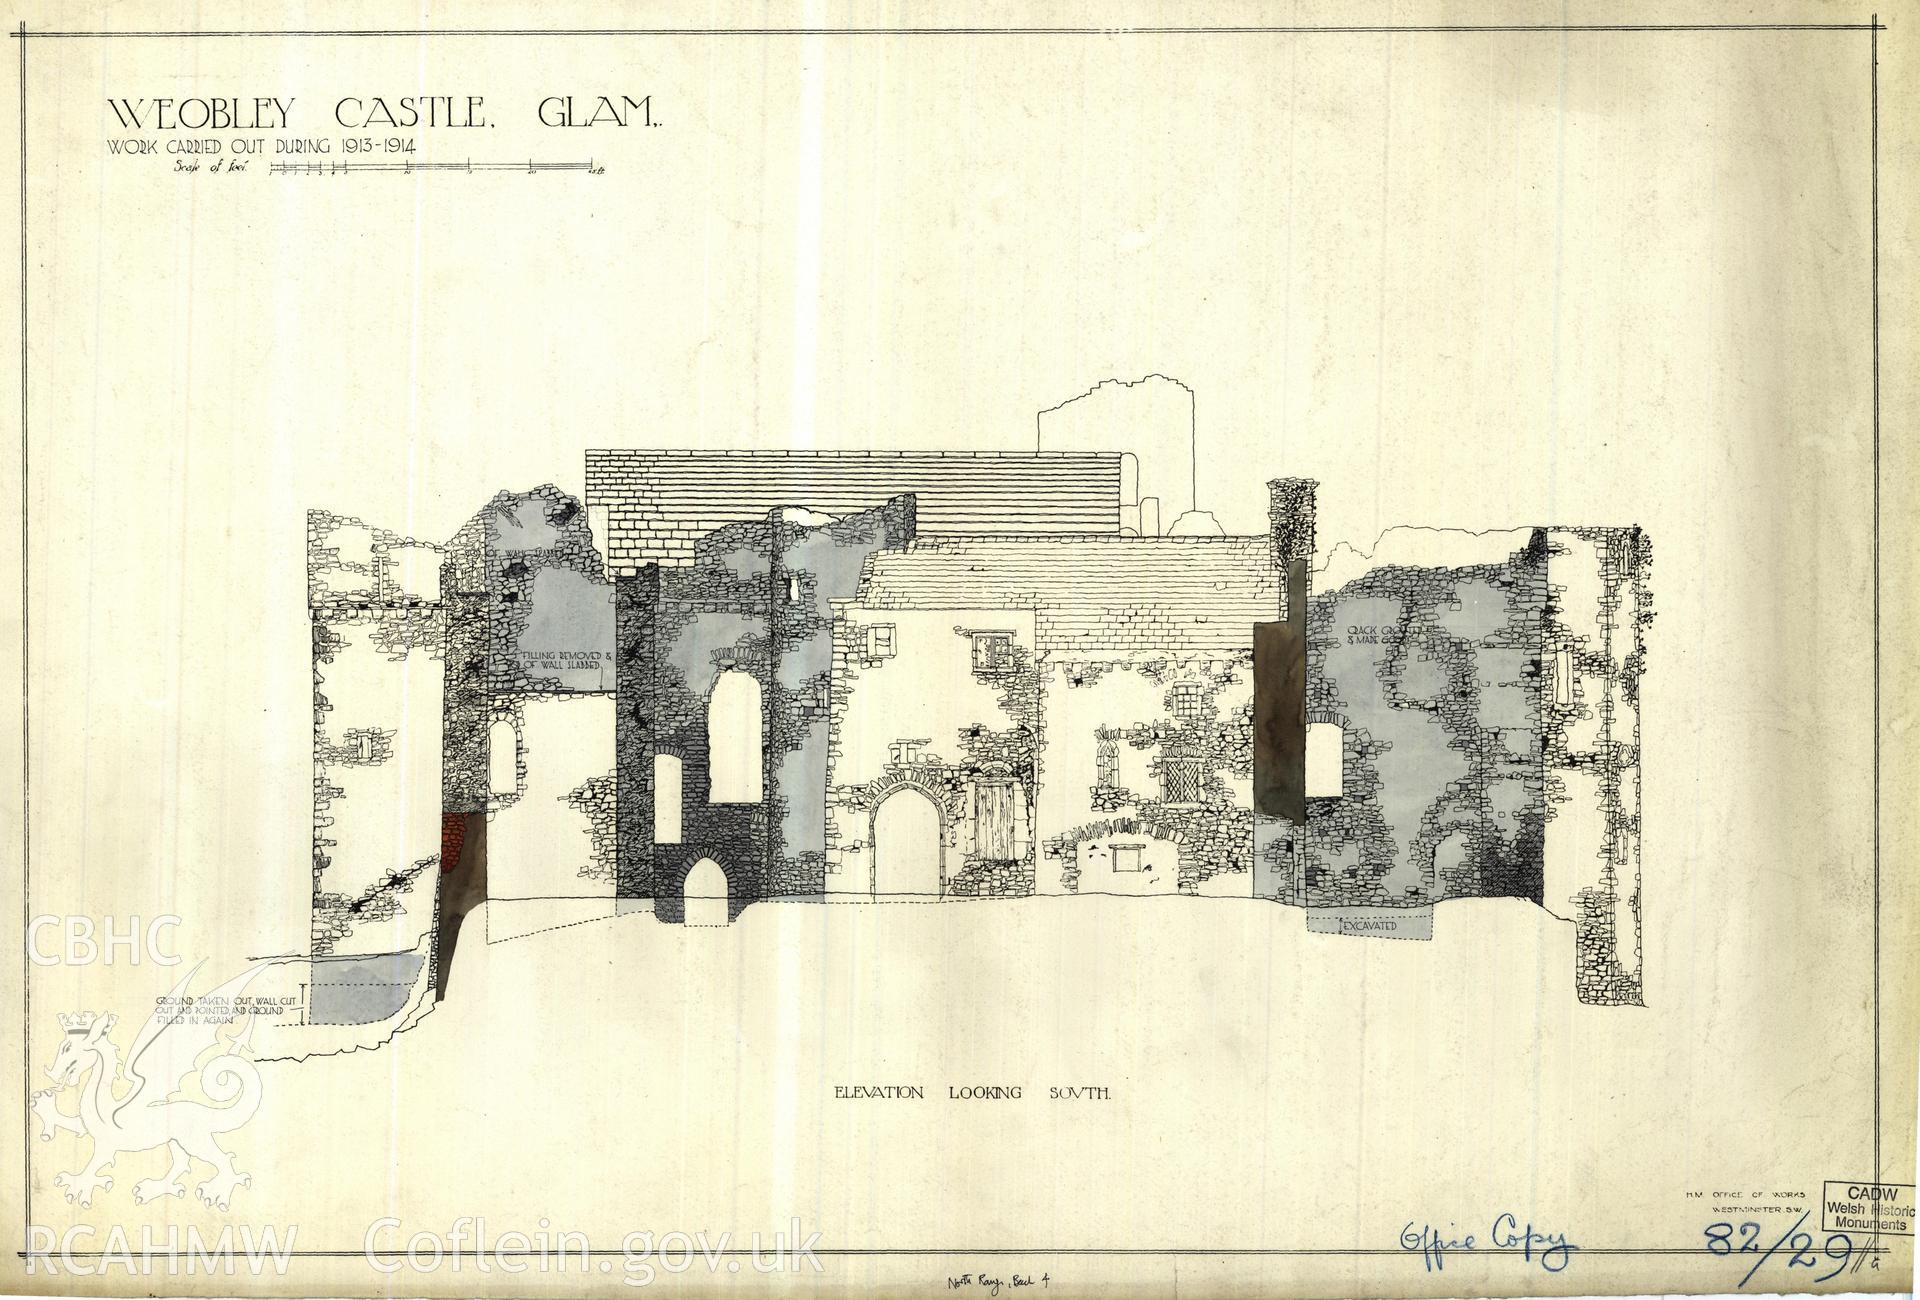 Cadw guardianship monument drawing of Weobley Castle. N range rear elevation, print. Cadw Ref. No:82/29//a. Scale 1:48.